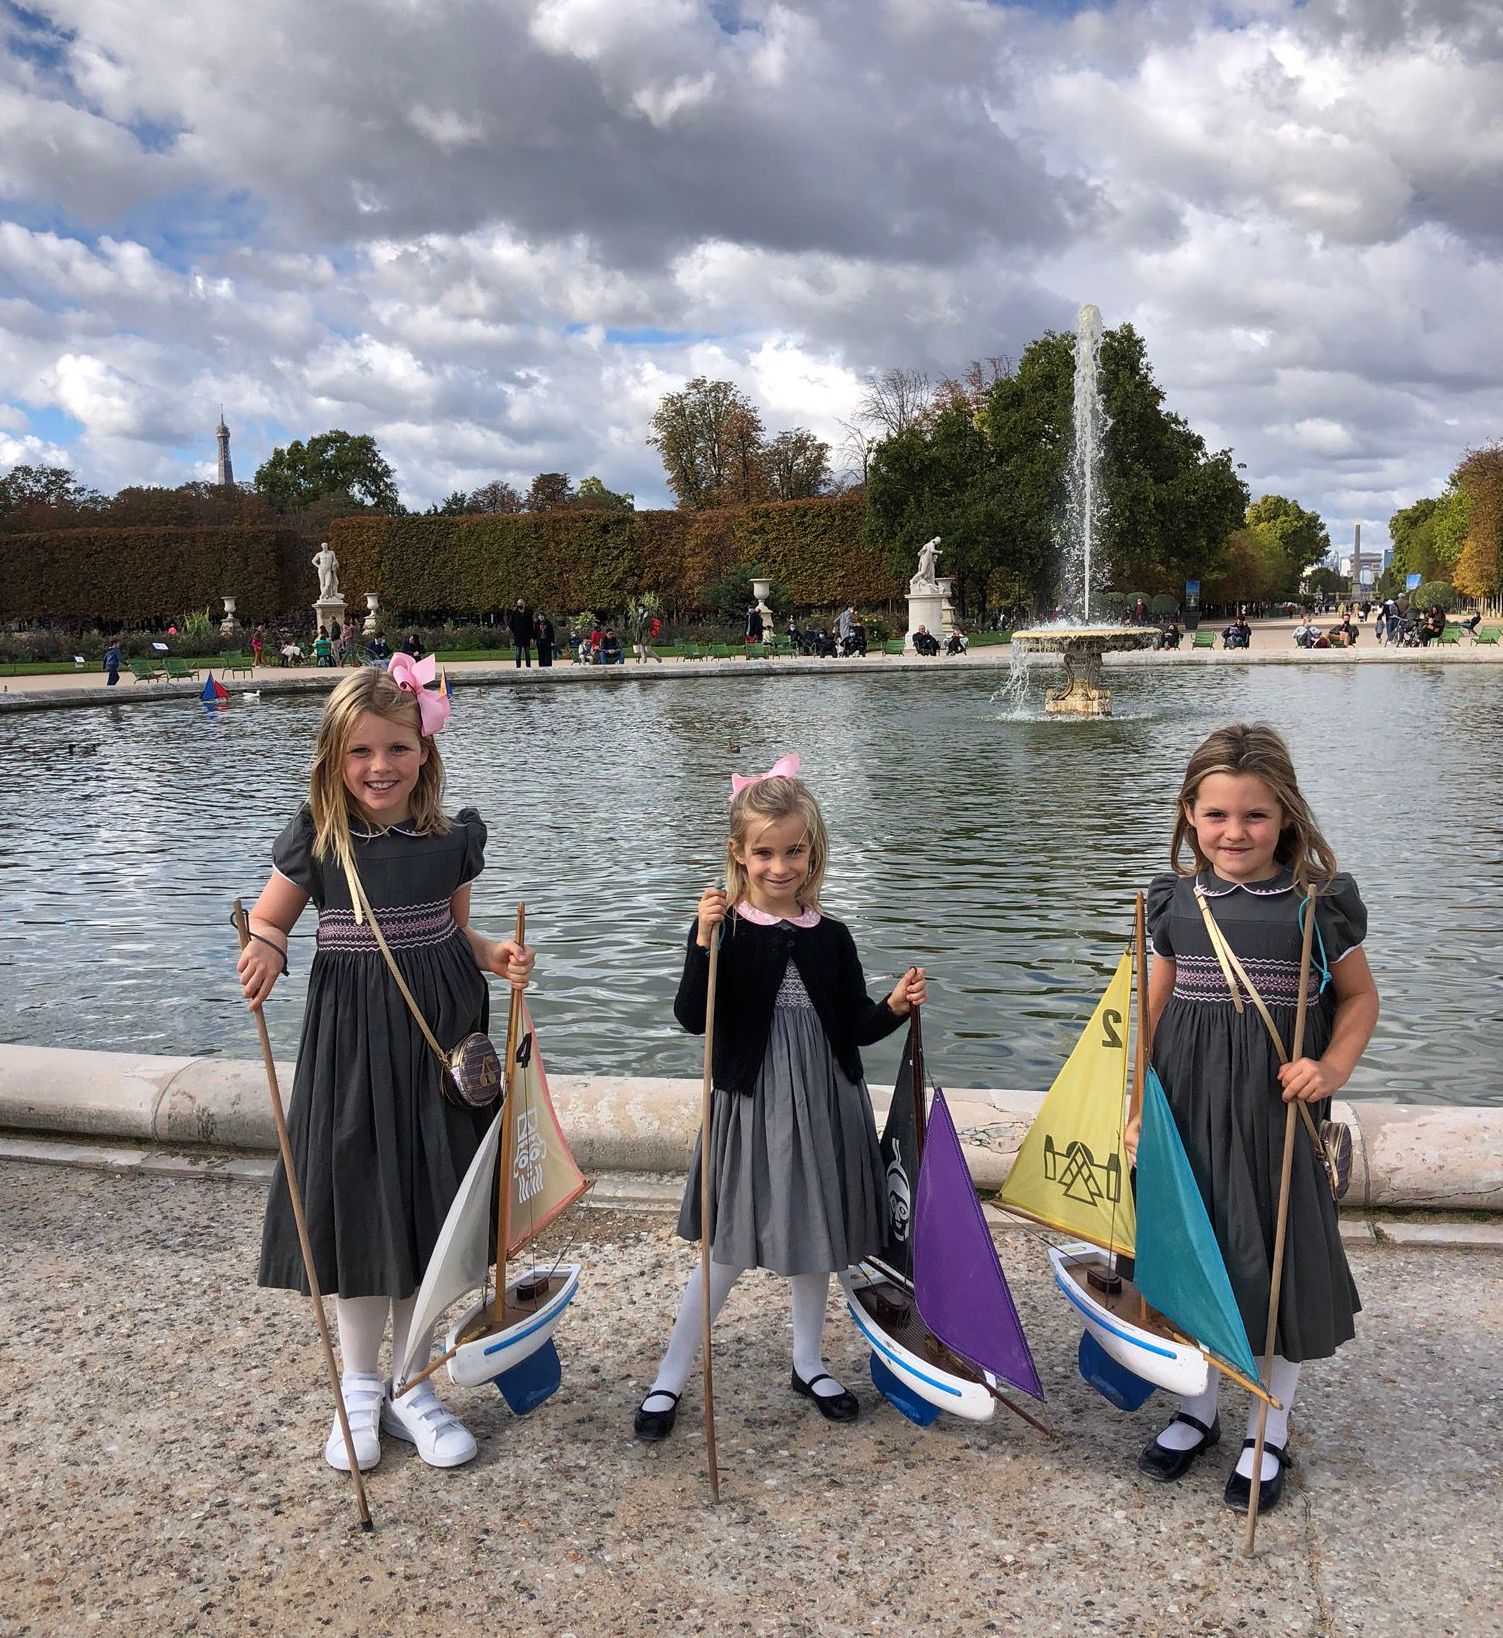 Paris with kids travelling to Paris as a family advice children's store clothing boutique handmade traditional dresses for little girls Jardin du Luxembourg